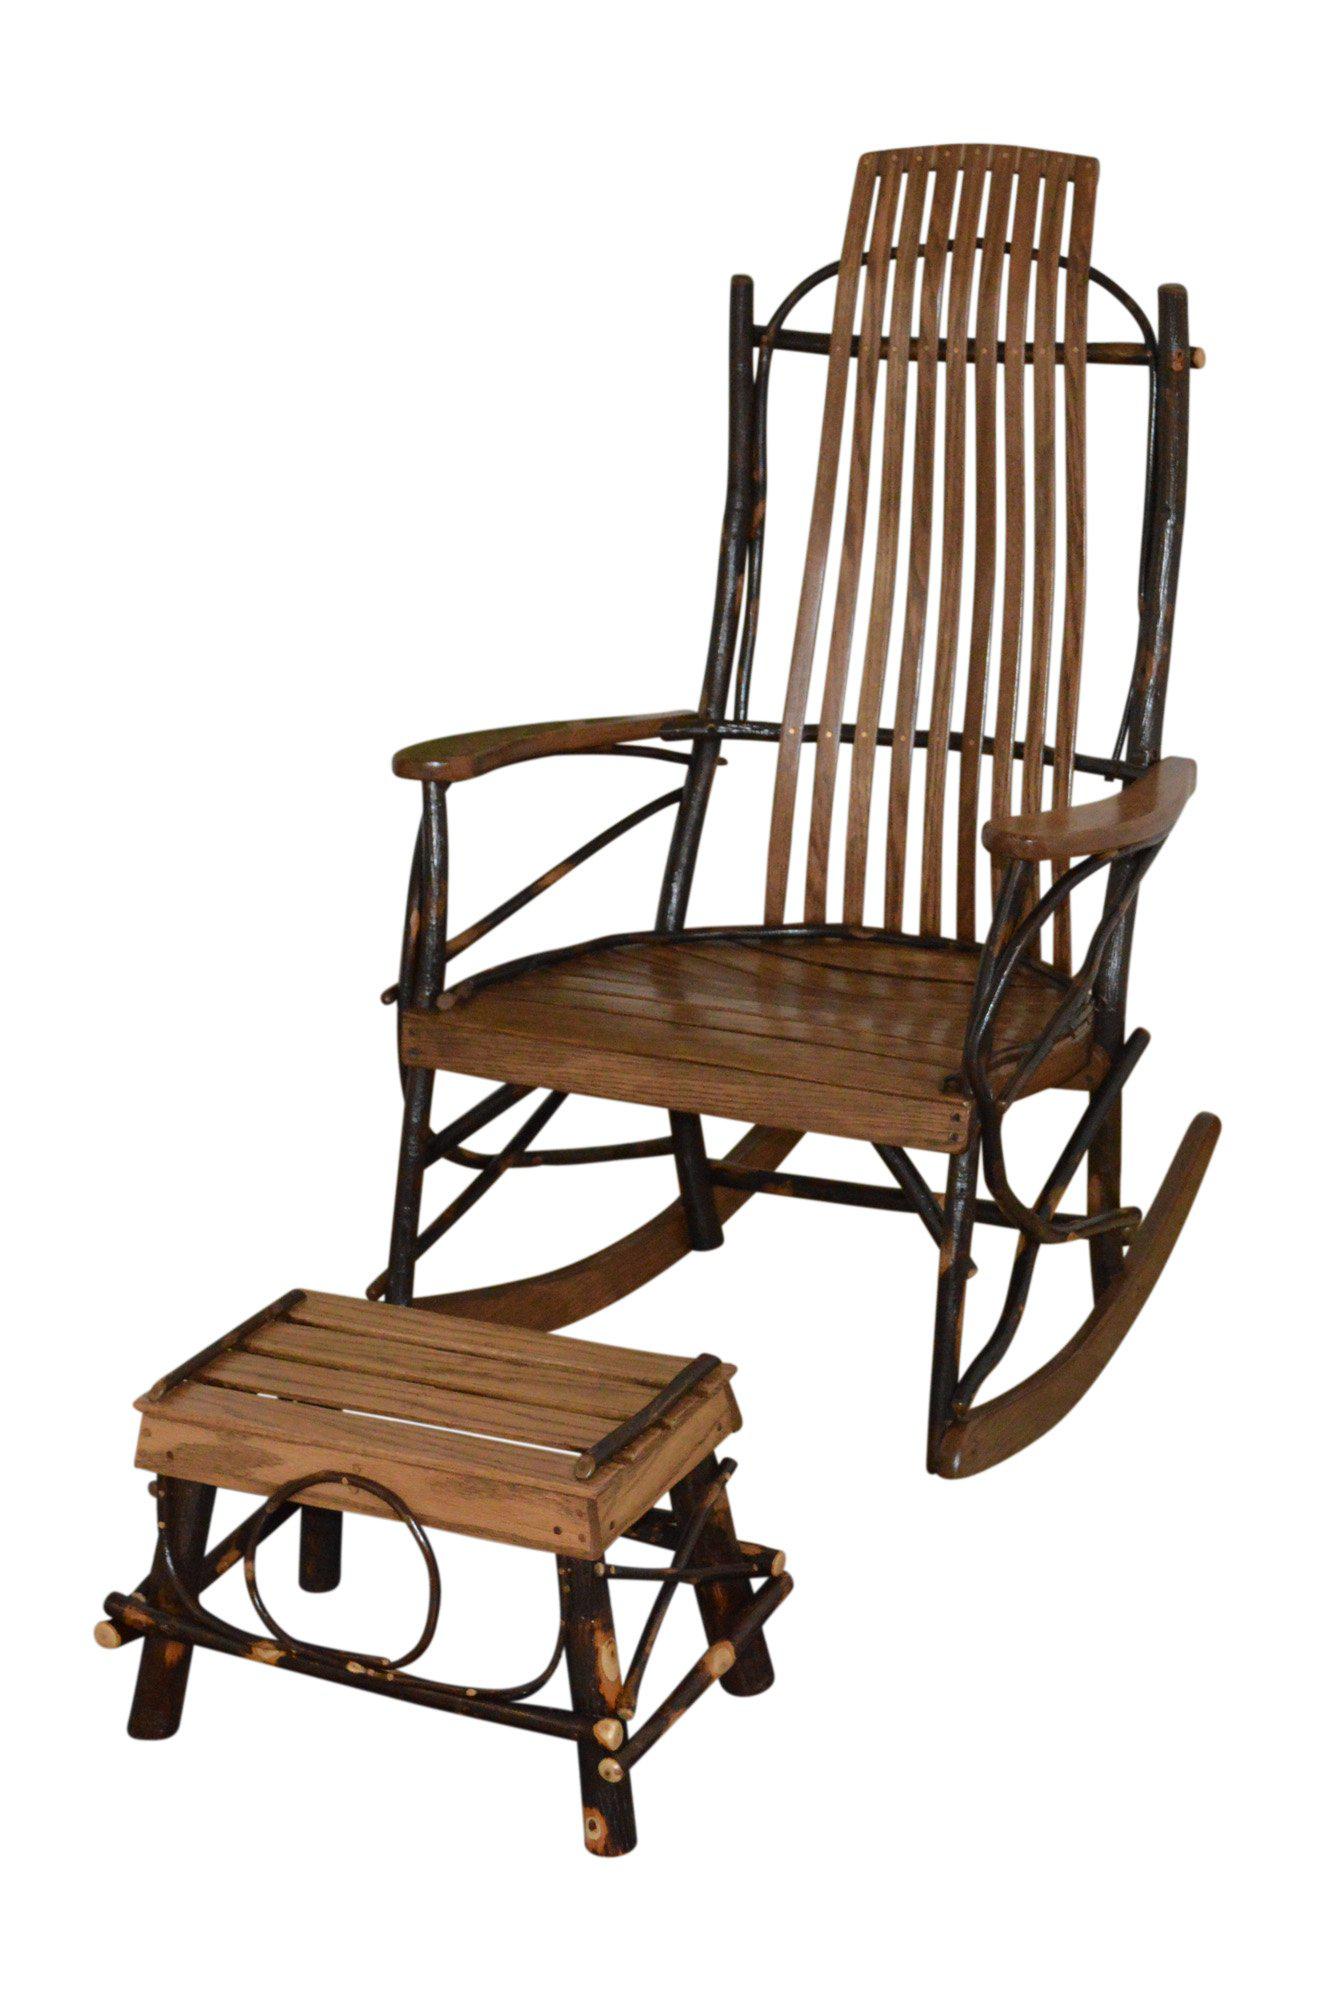 A&L Furniture Co. Amish Bentwood Hickory 9-Slat Rocking Chair with Foot Stool Set - LEAD TIME TO SHIP 10 BUSINESS DAYS